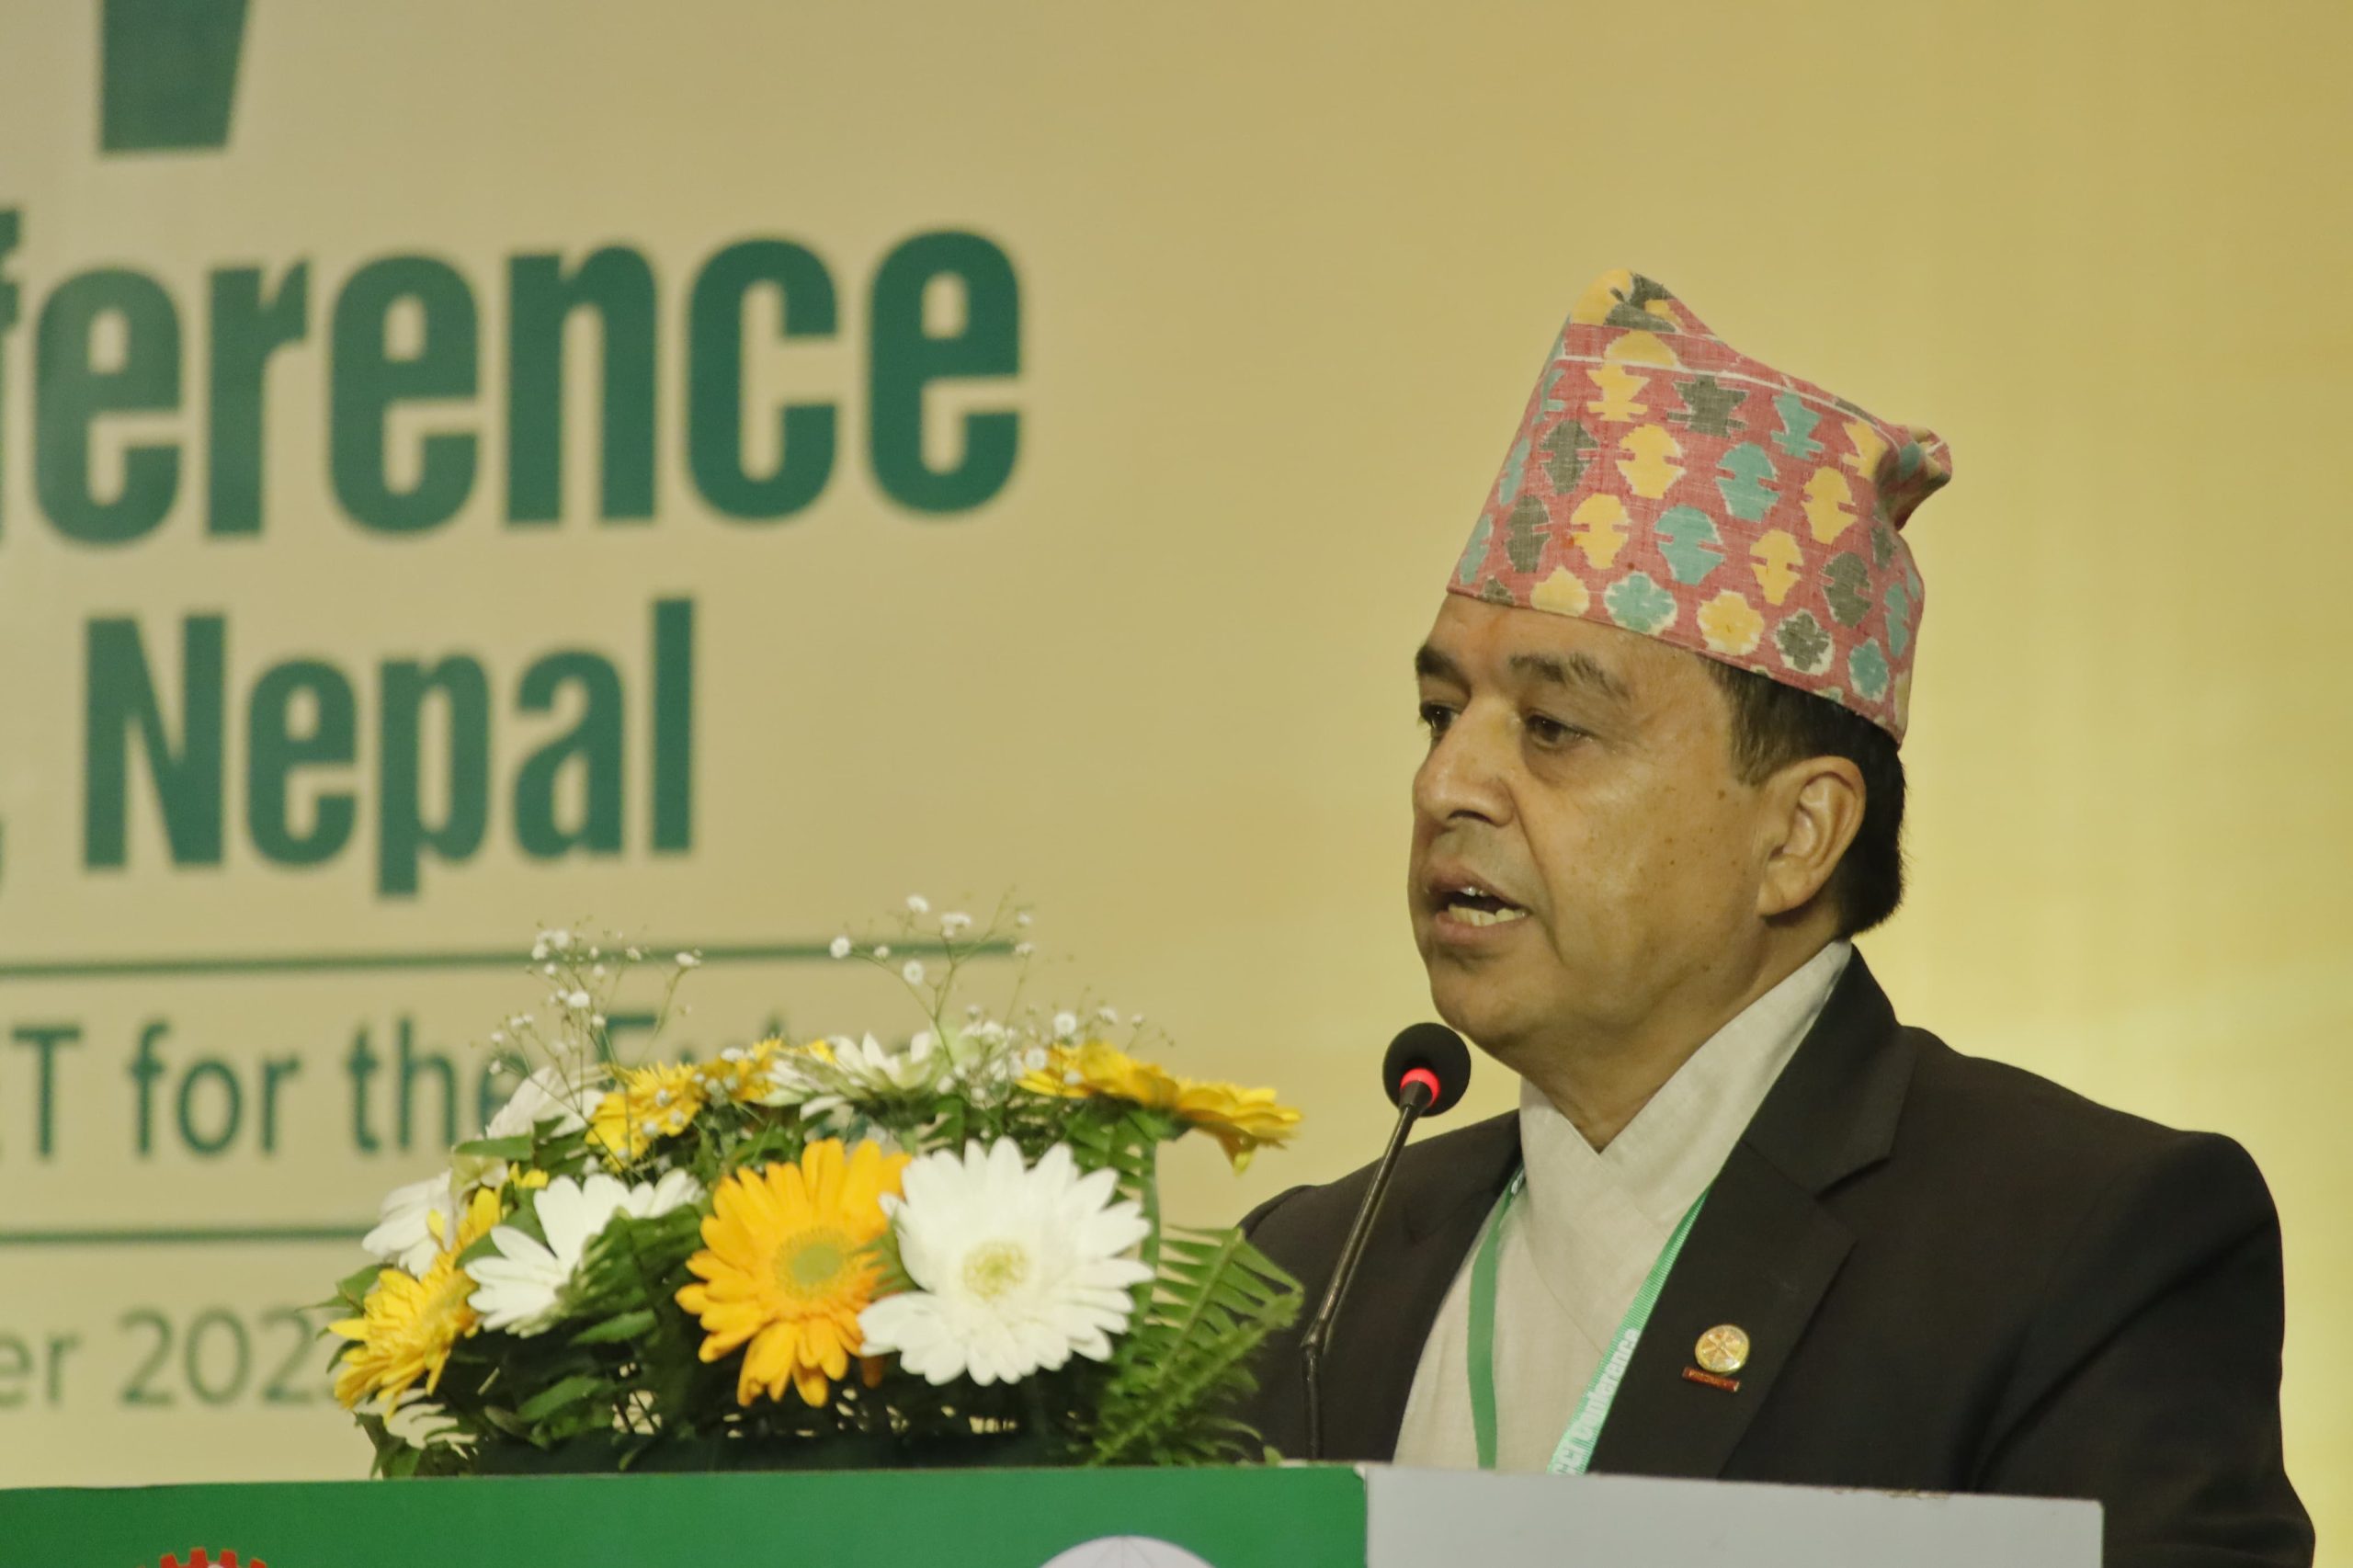 FNCCI President Dhakal welcomes 37th CACCI conference, Focusing on rconomic development in Asia-Pacific region